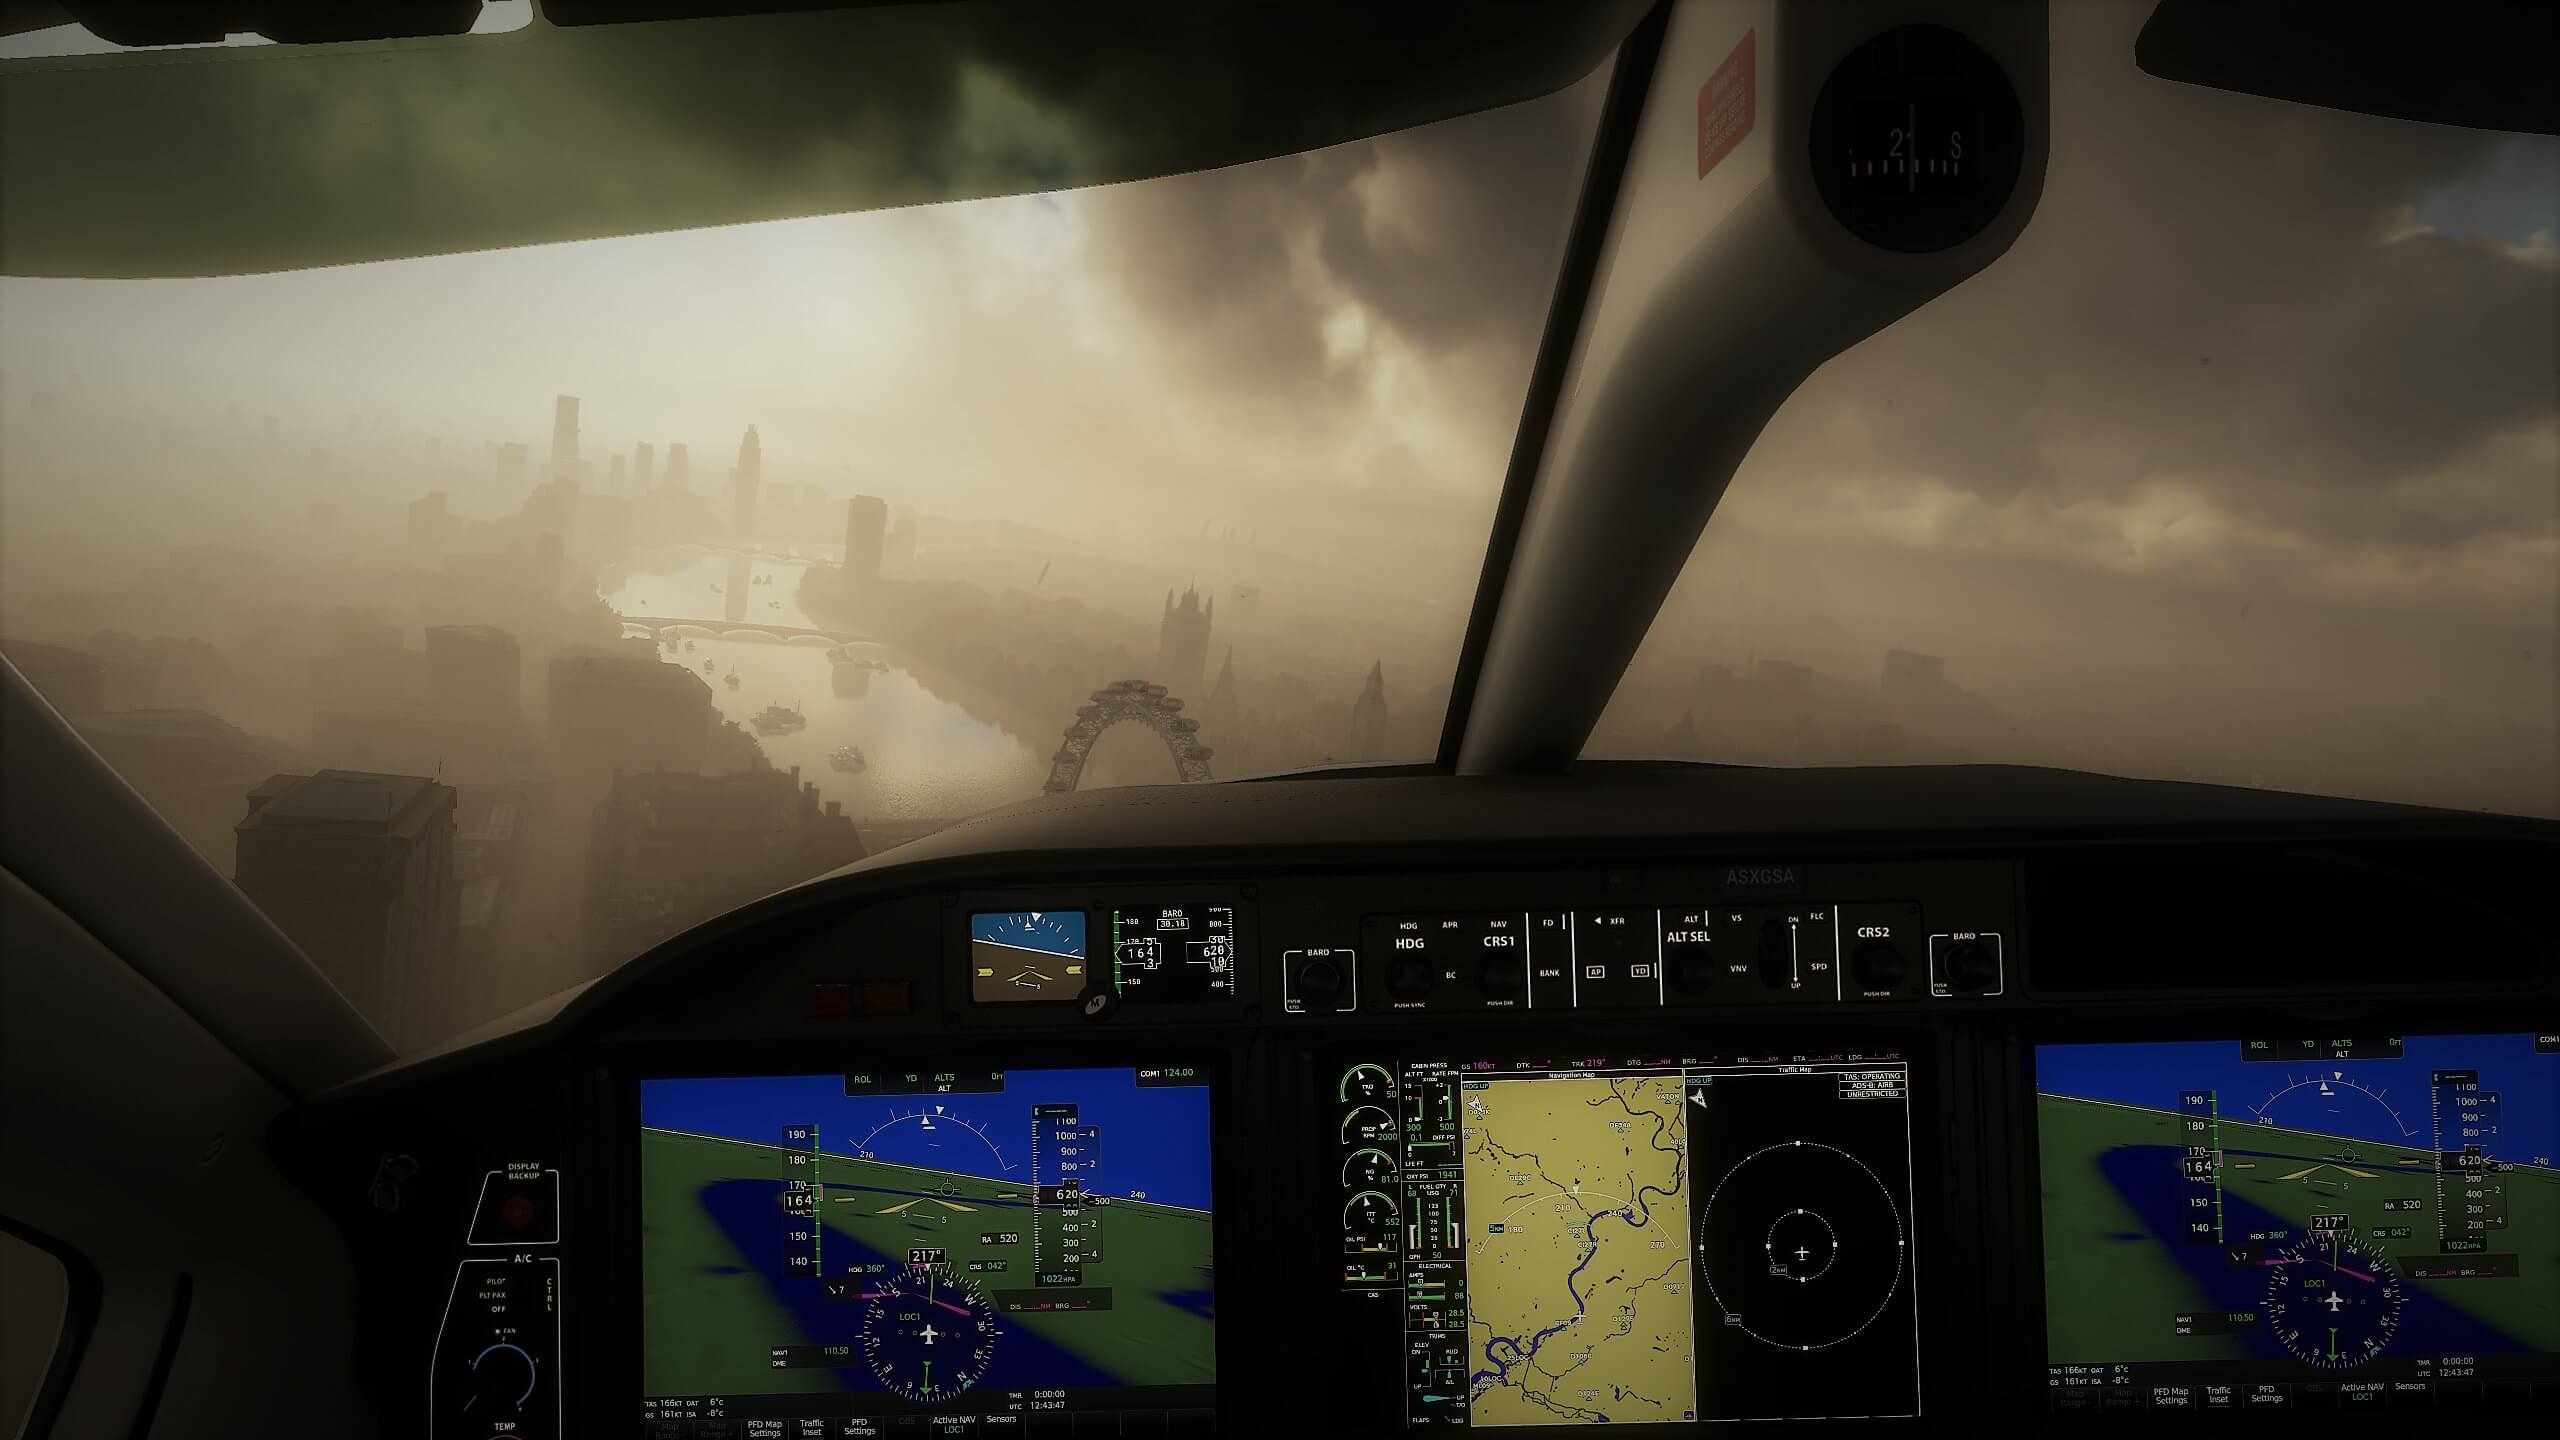 A foggy morning above London is visible through the window of a plane's cockpit.